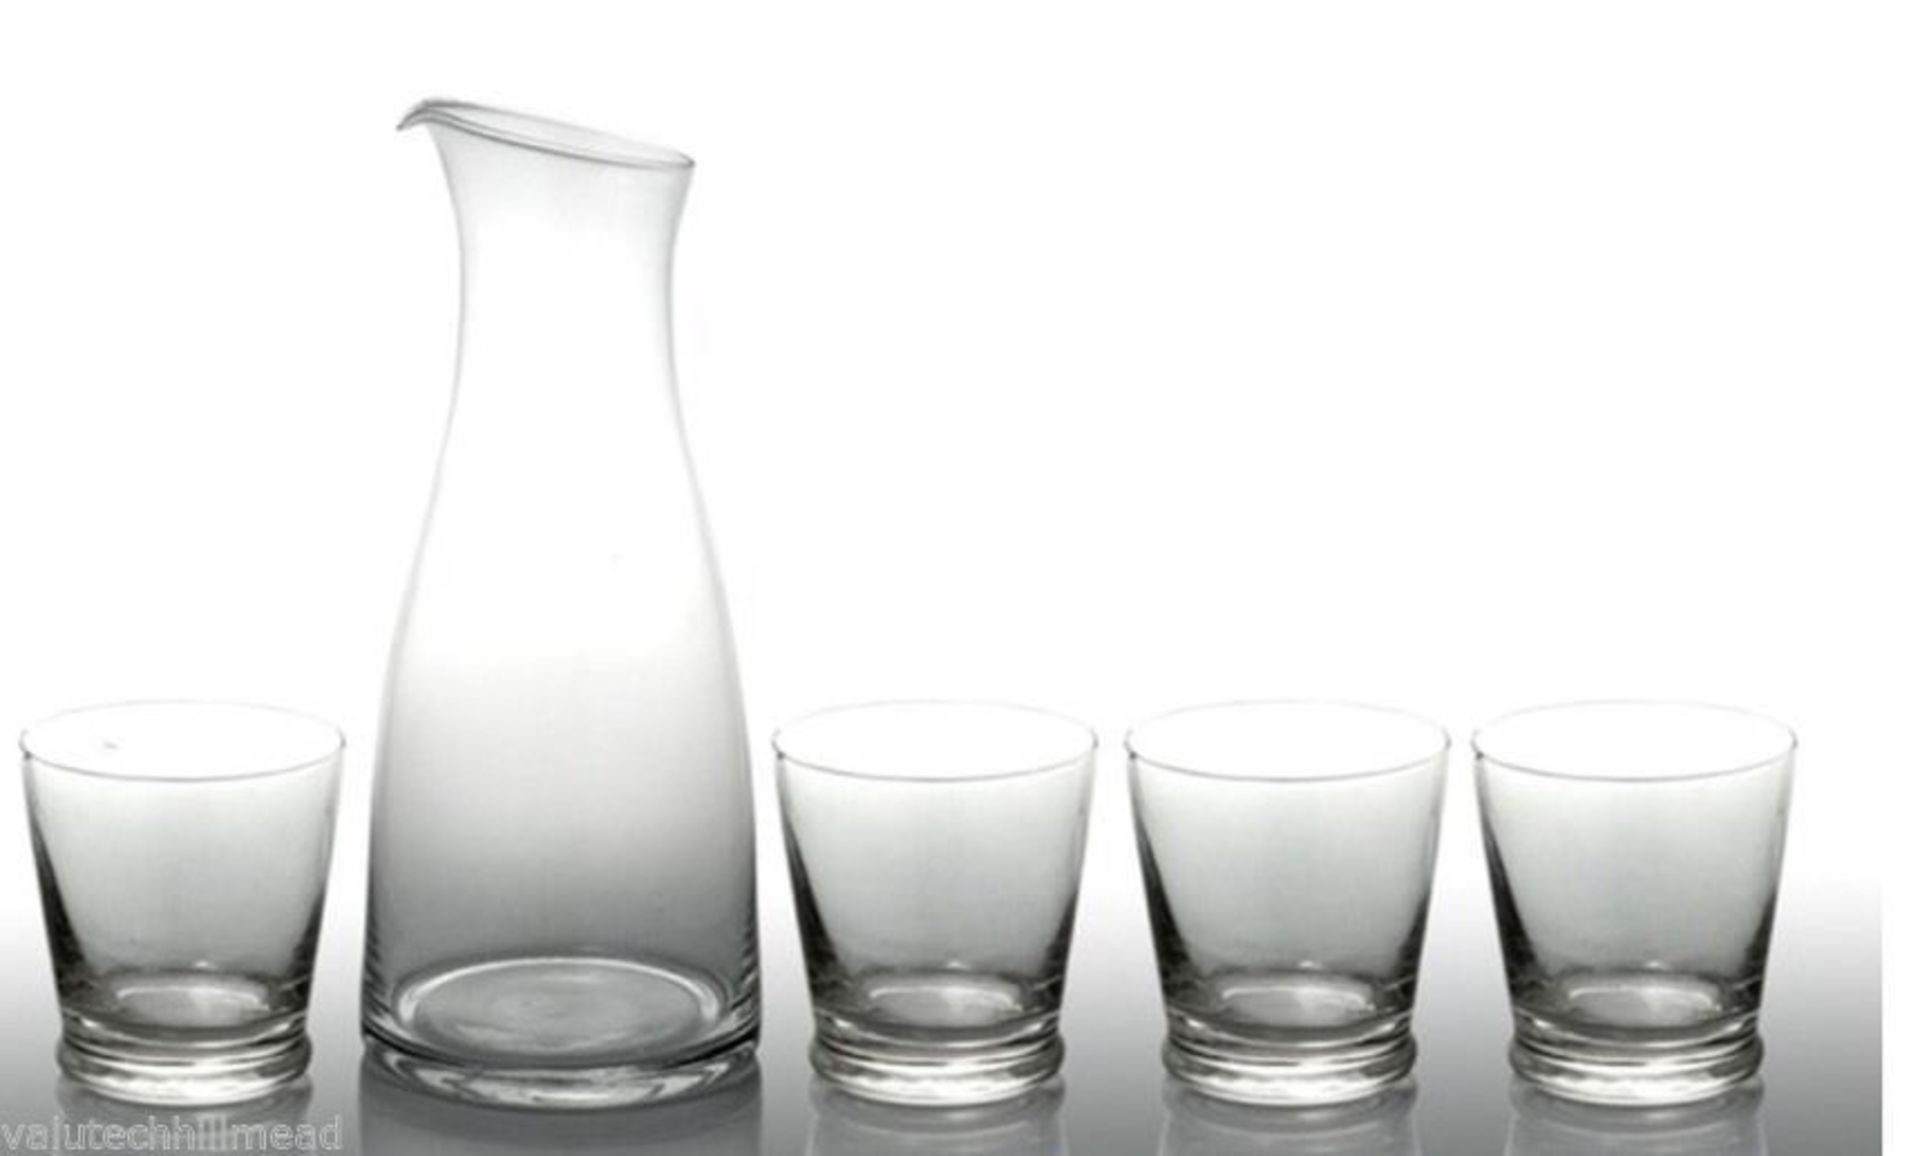 V Brand New Bistro & Co. 1.2L Glass Carafe With 4 Tumblers £19.89 at shoptail